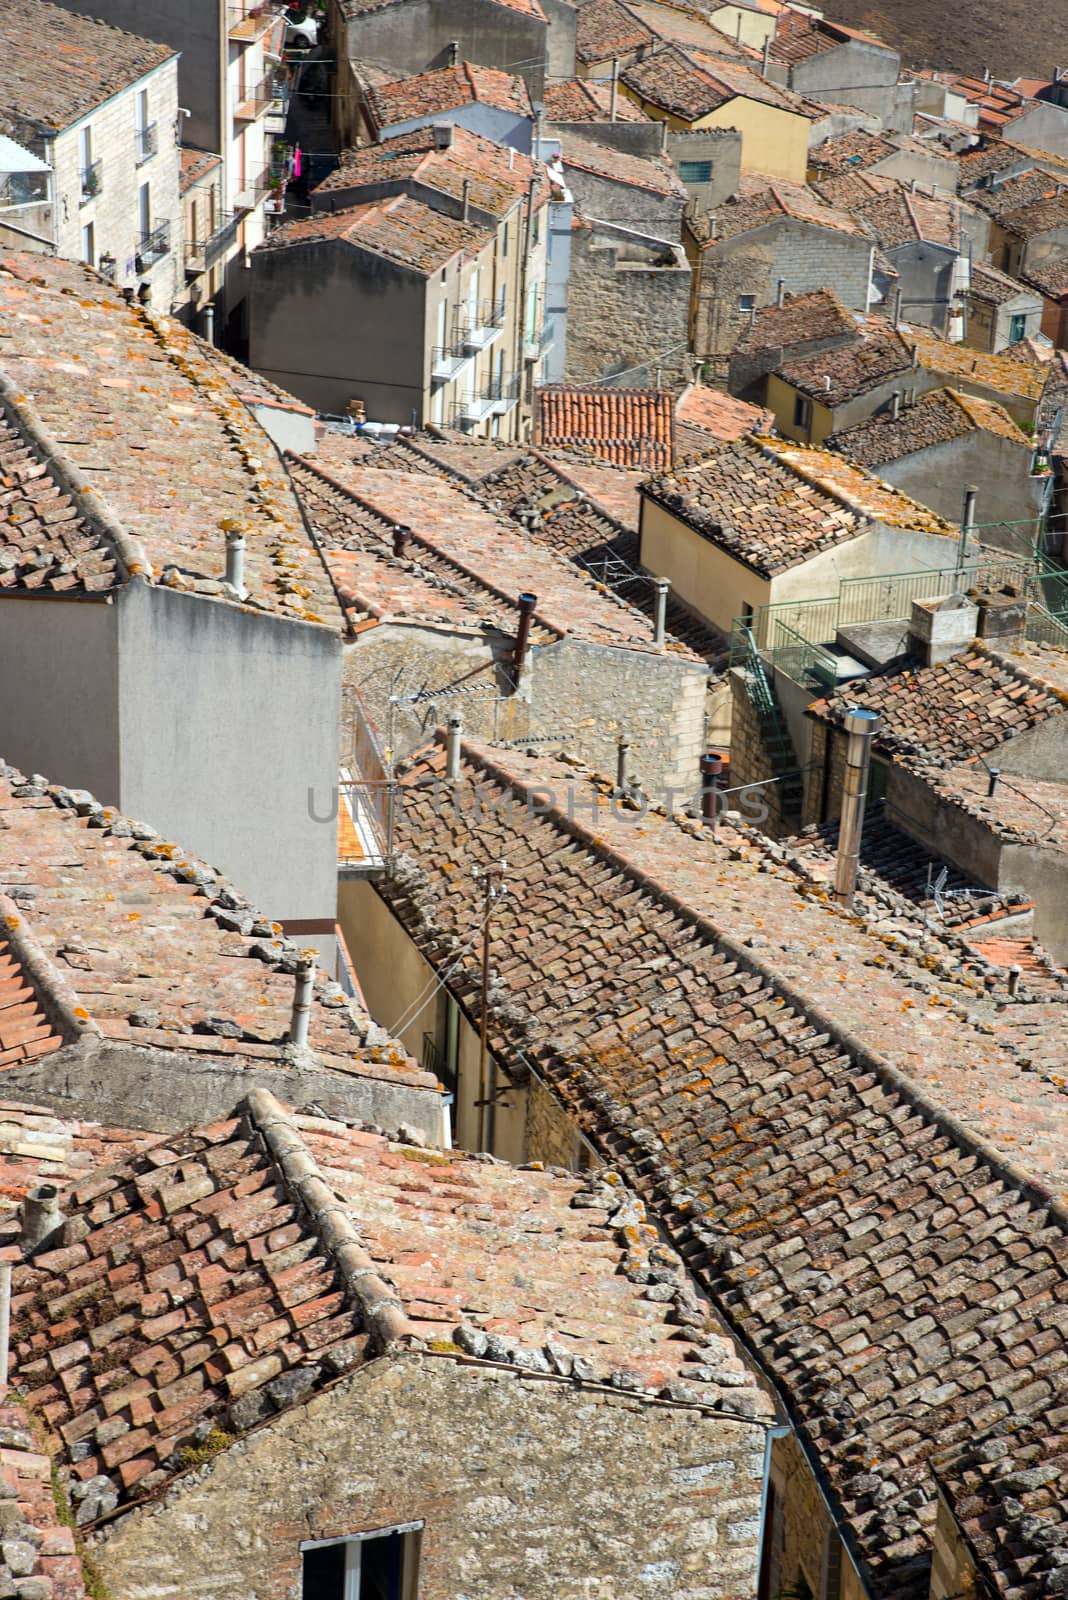 The old roofs of Gangi in Sicily by elxeneize